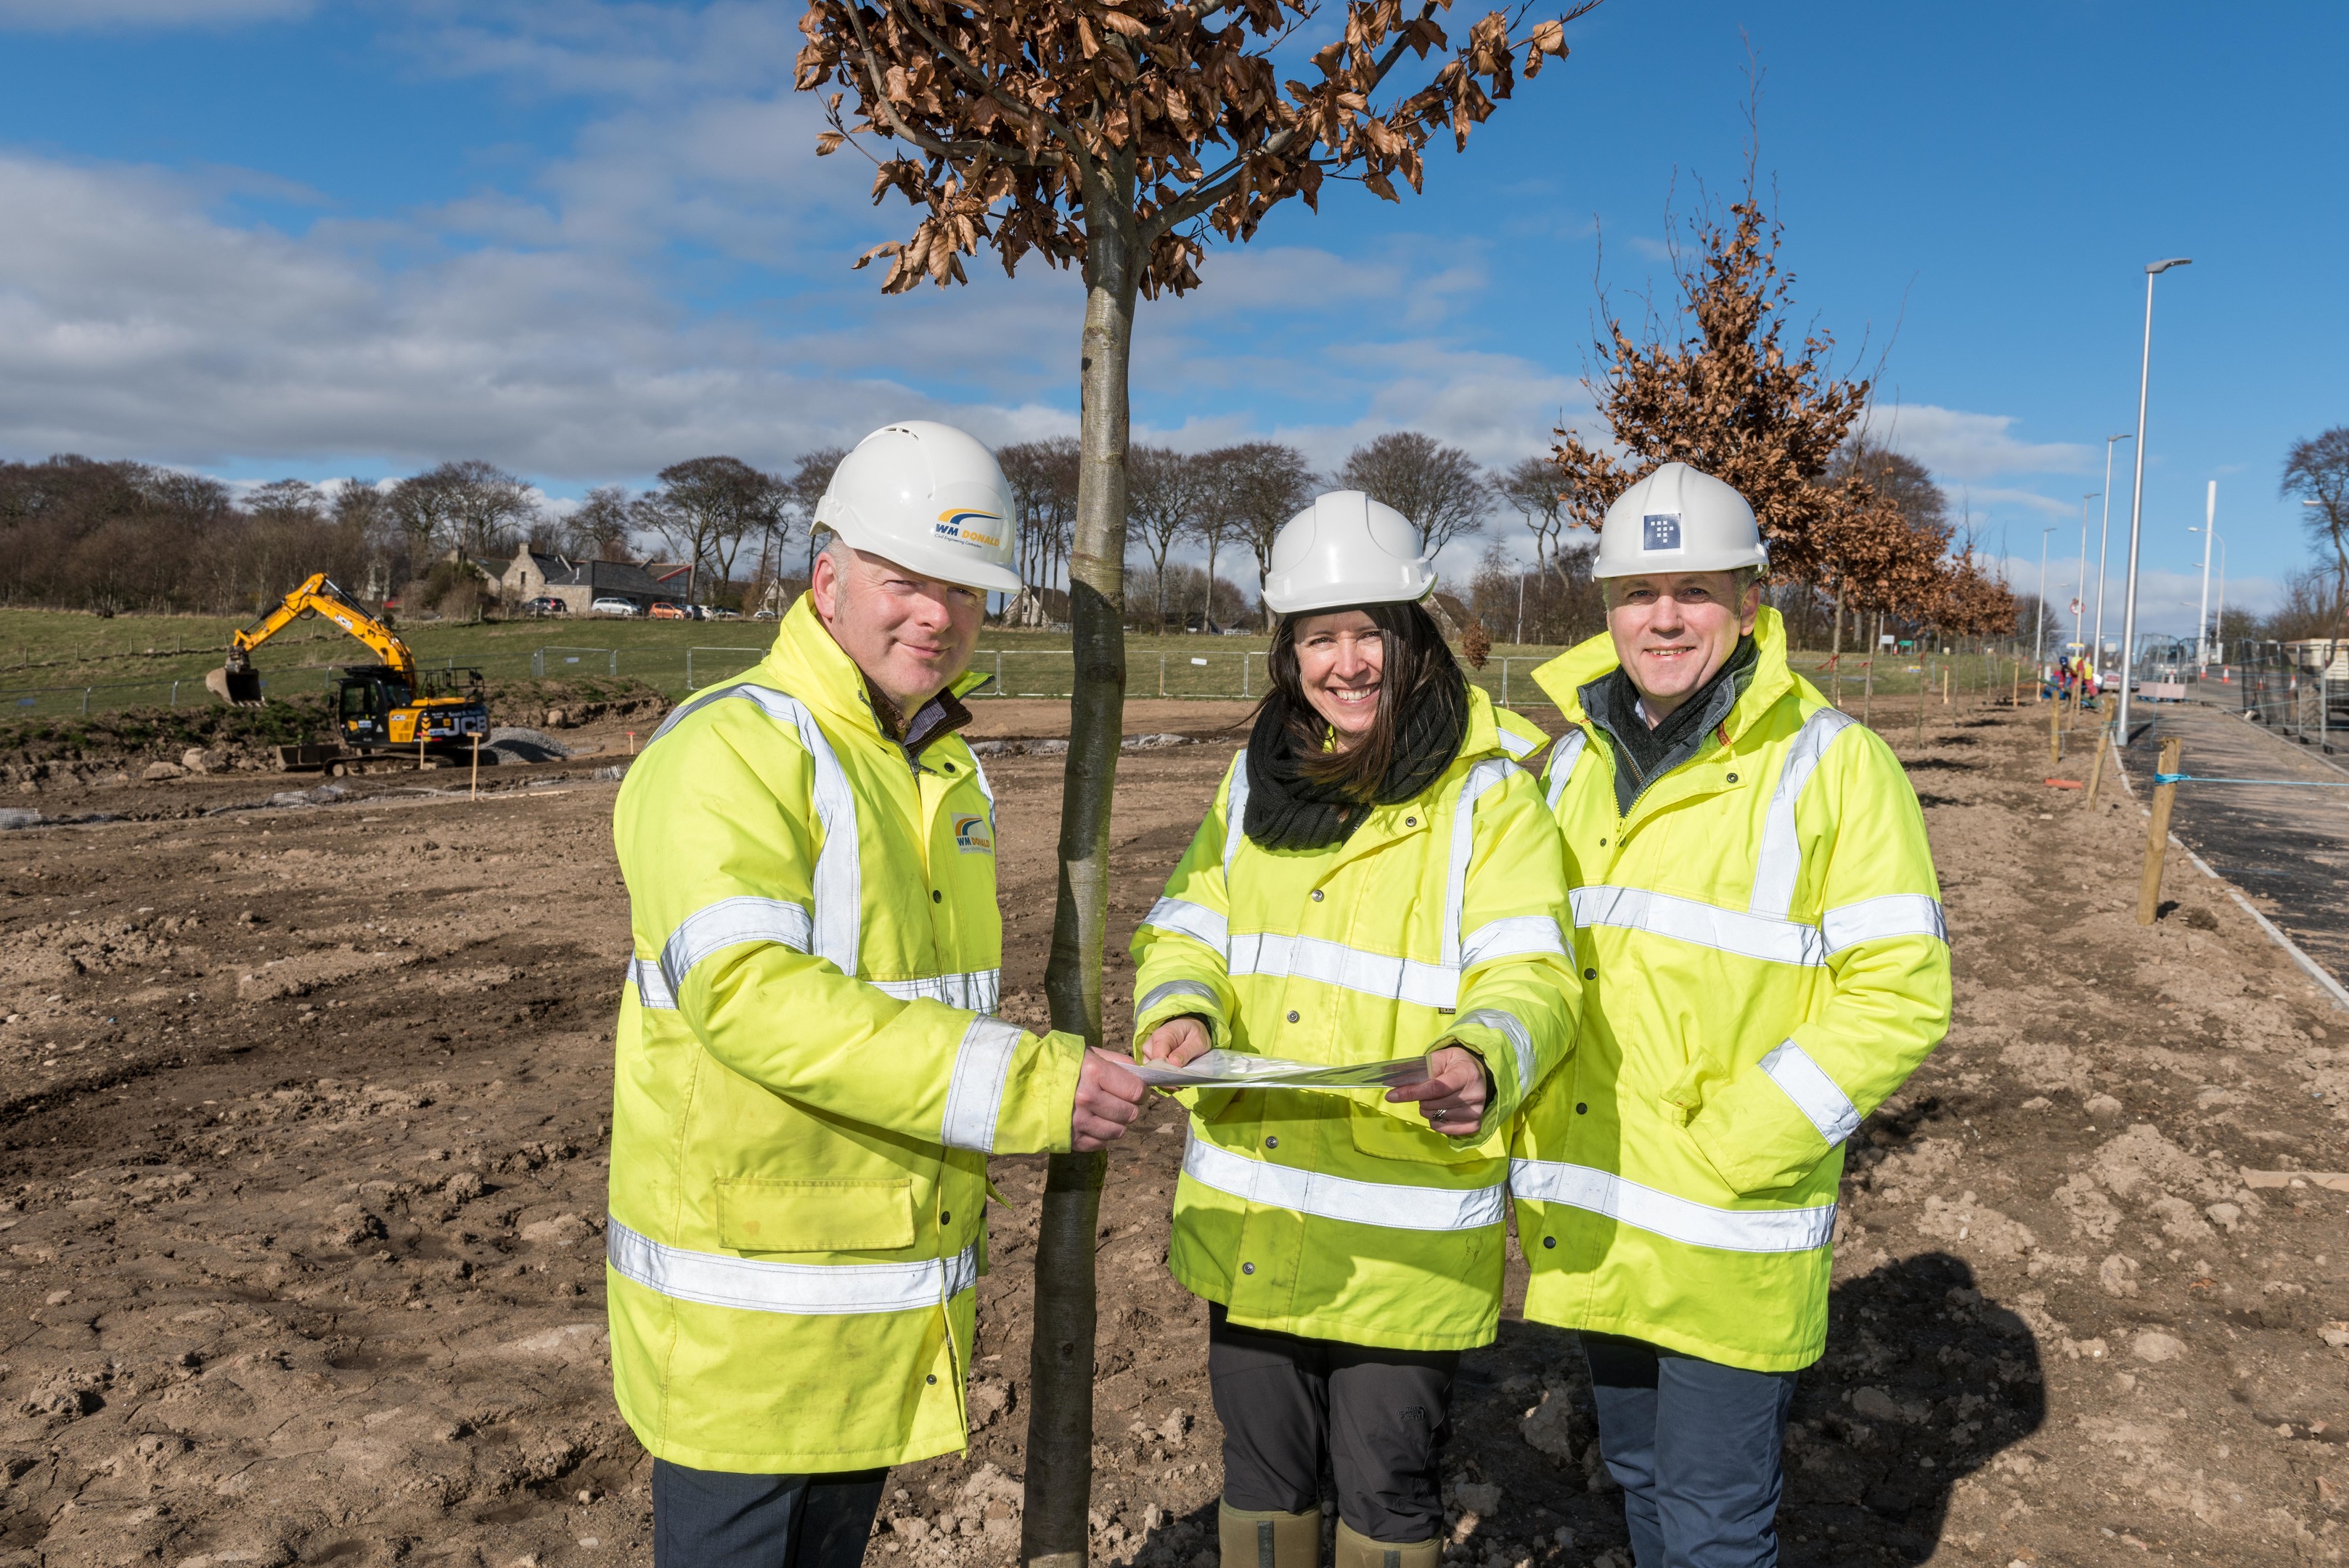 Ian Downie of principal contractor WM Donald, Laura Scott-Simmons of landscape architects Benton Scott-Simmons and Gordon Rendall of project managers Turner & Townsend at the new community of Grandhome, where more than 1,200 trees are being planted in the first phase of development.